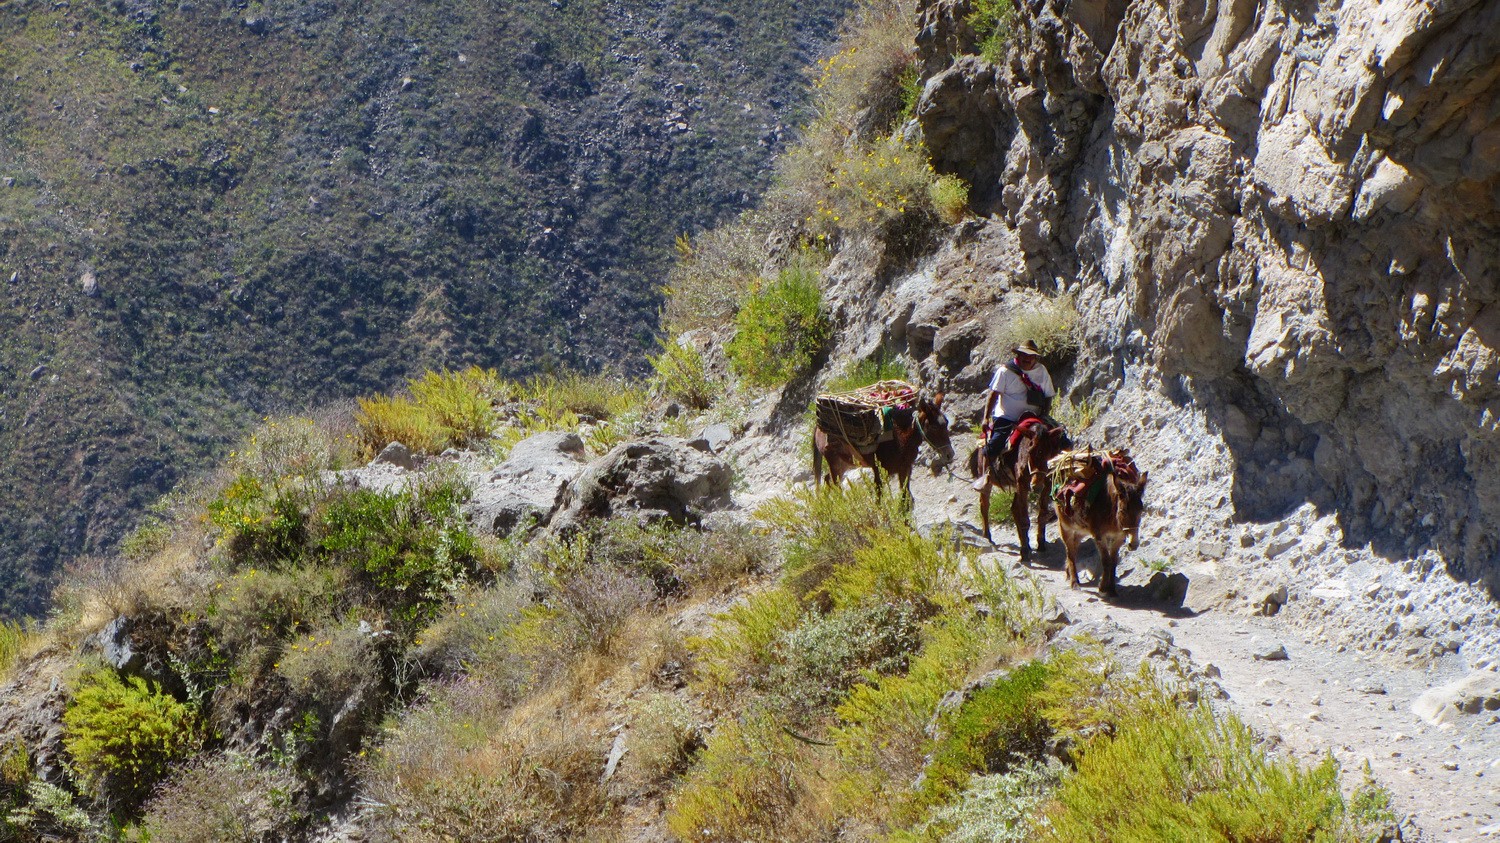 The trail down into the Colca Canyon